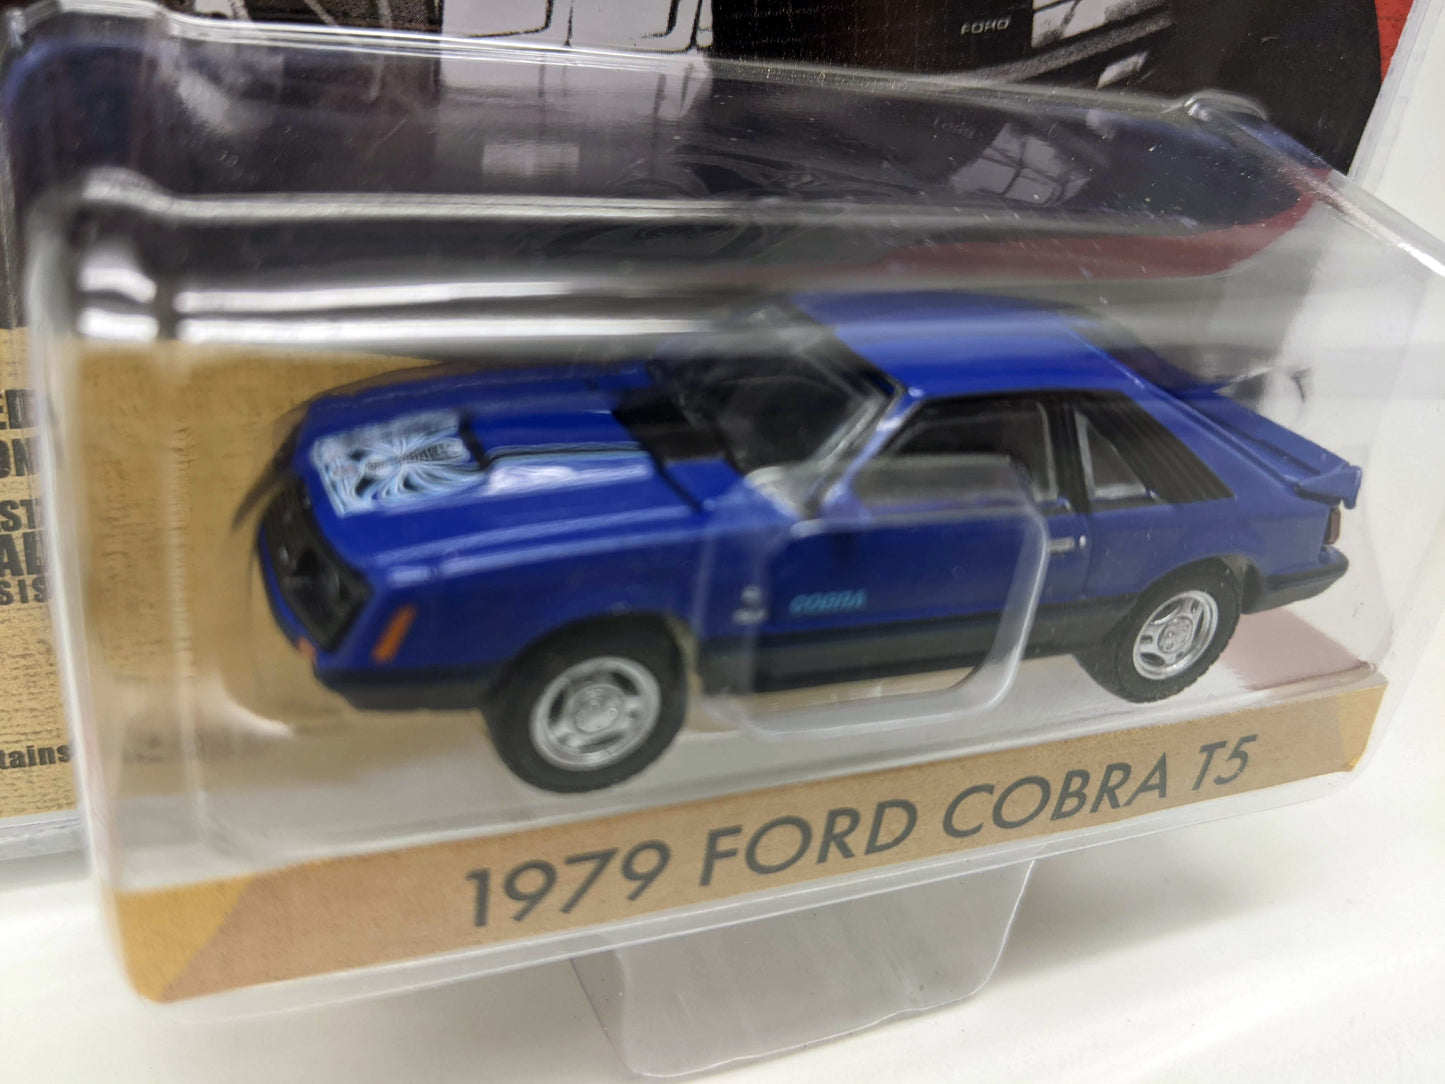 GL - 1979 Ford Cobra T5 - Hobby Exclusive